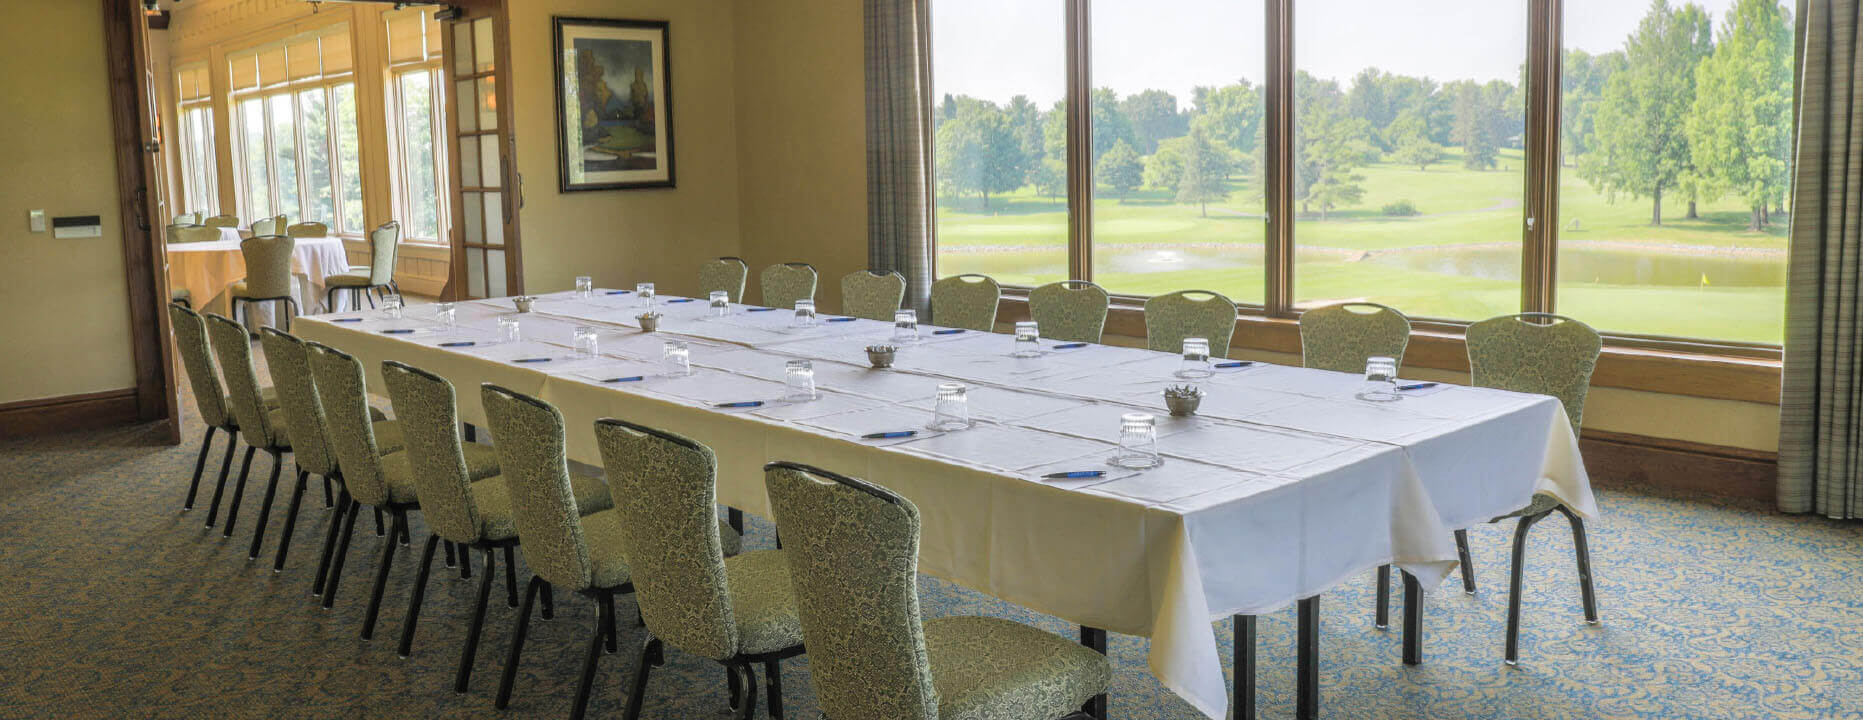 McCarthy Room at Hershey Country Club